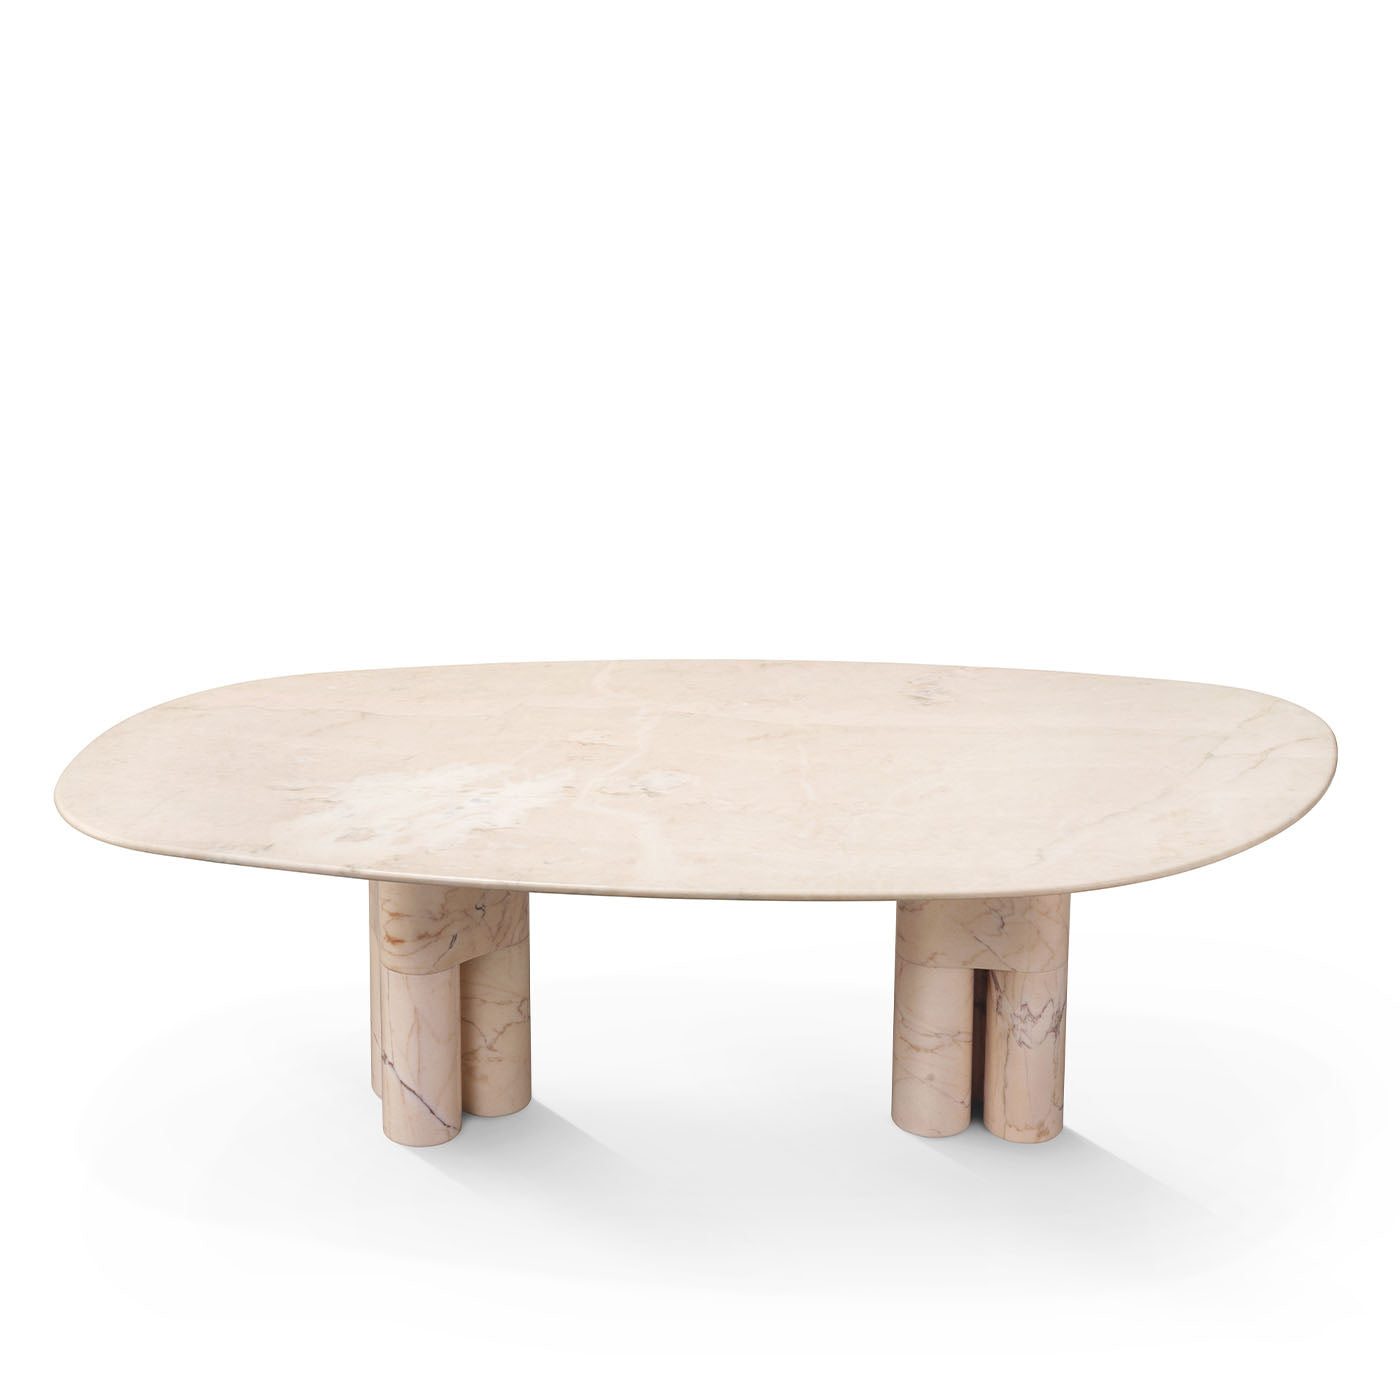 Tria Irregular Pink Portugal Marble Dining Table by L. Bozzoli - Alternative view 2